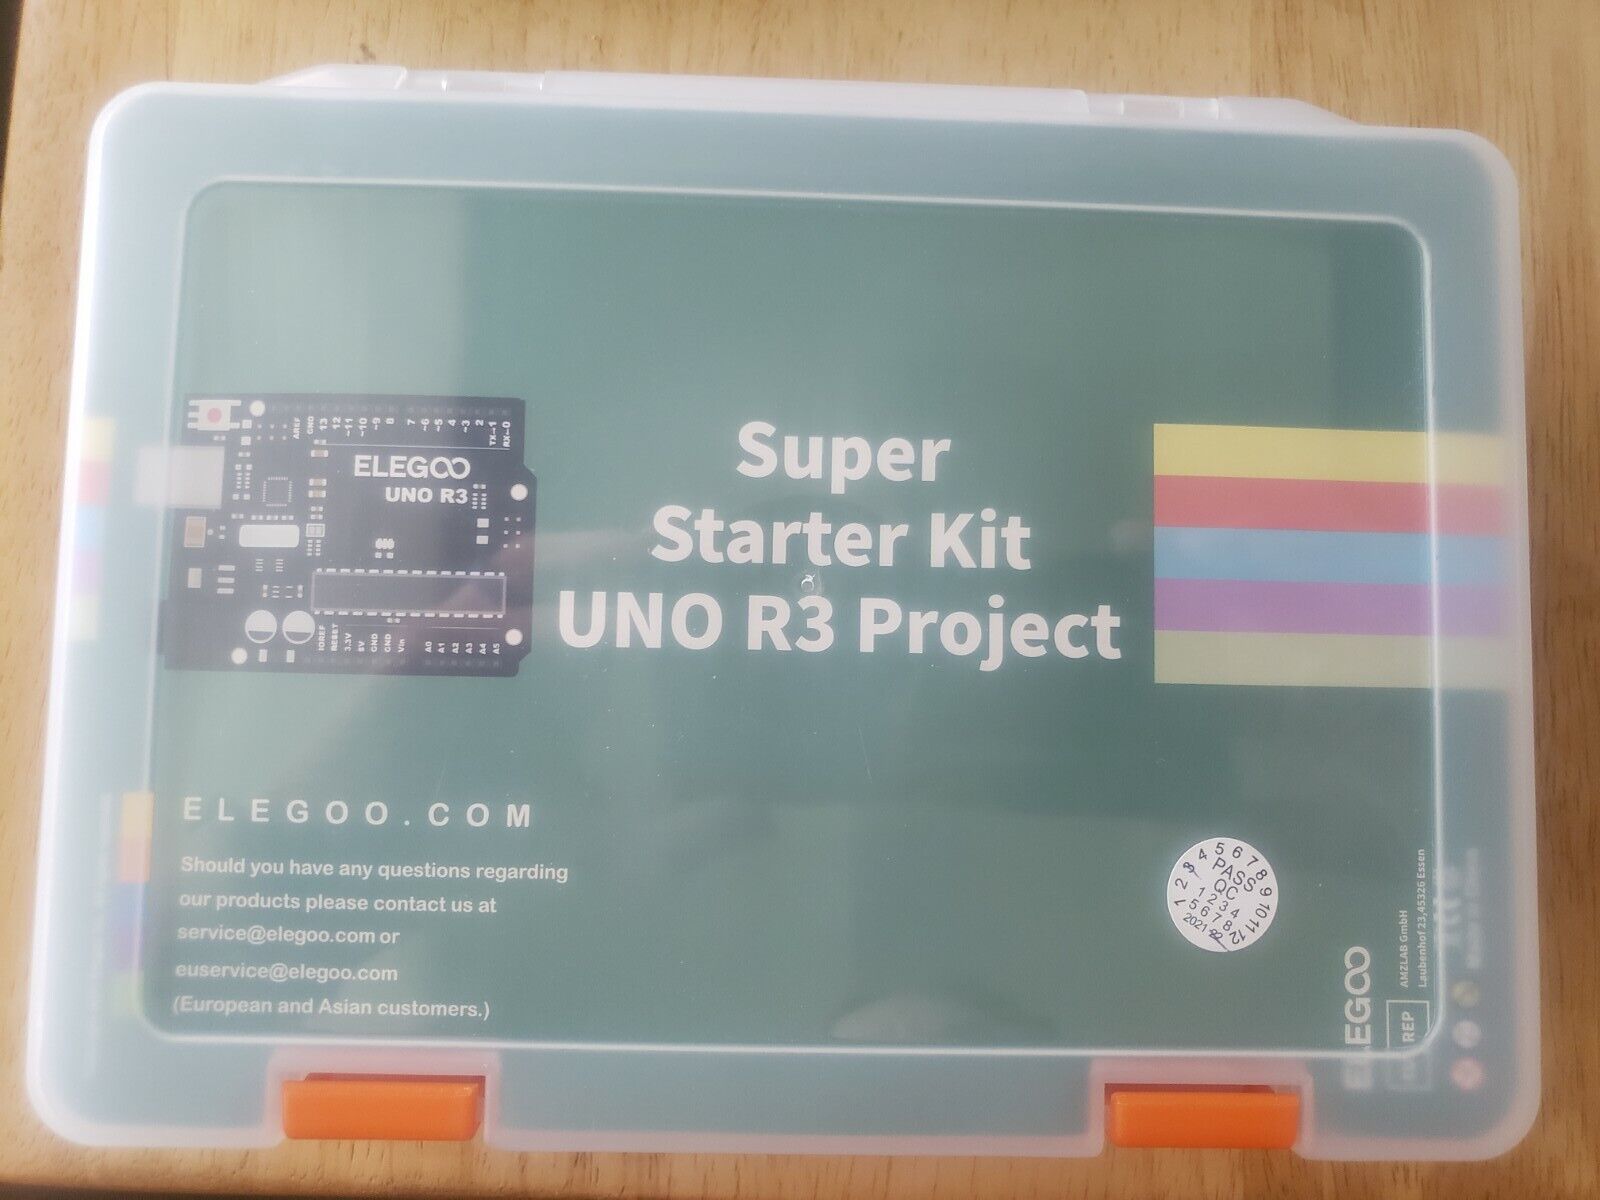 ELEGOO UNO Project Super Starter Kit with Tutorial and UNO R3